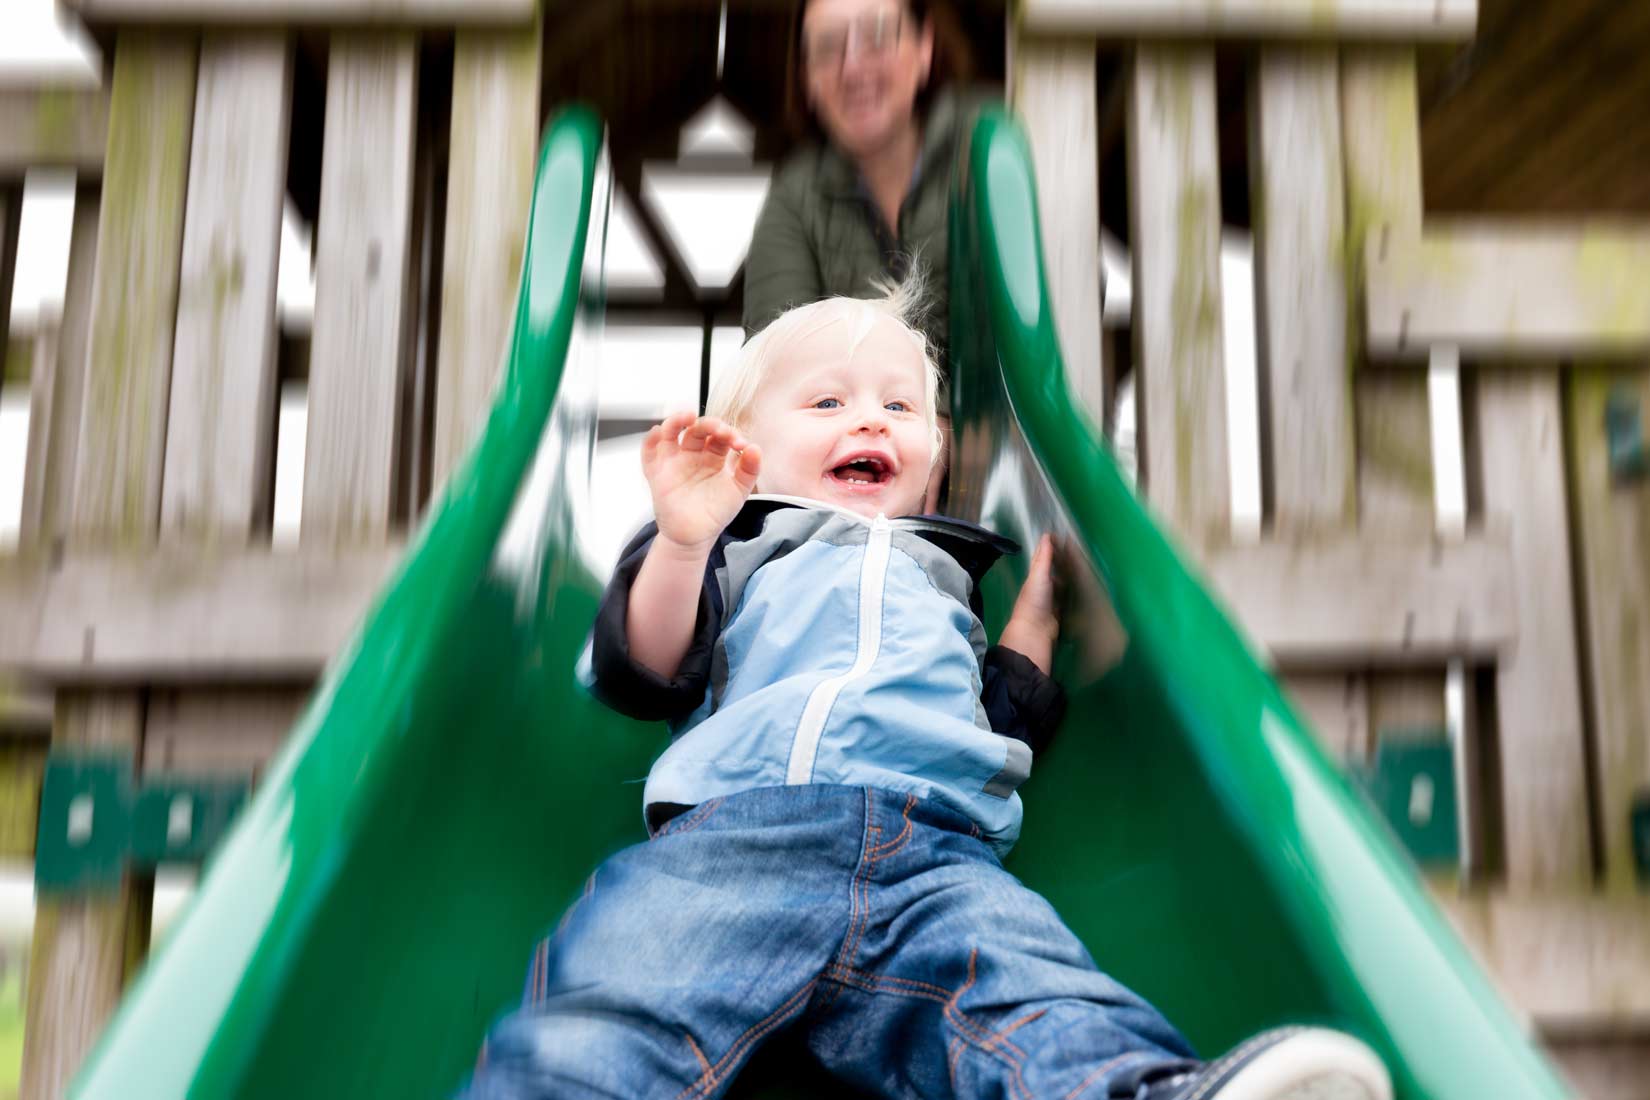 Editorial photography of a laughing toddler in blue on a green slide